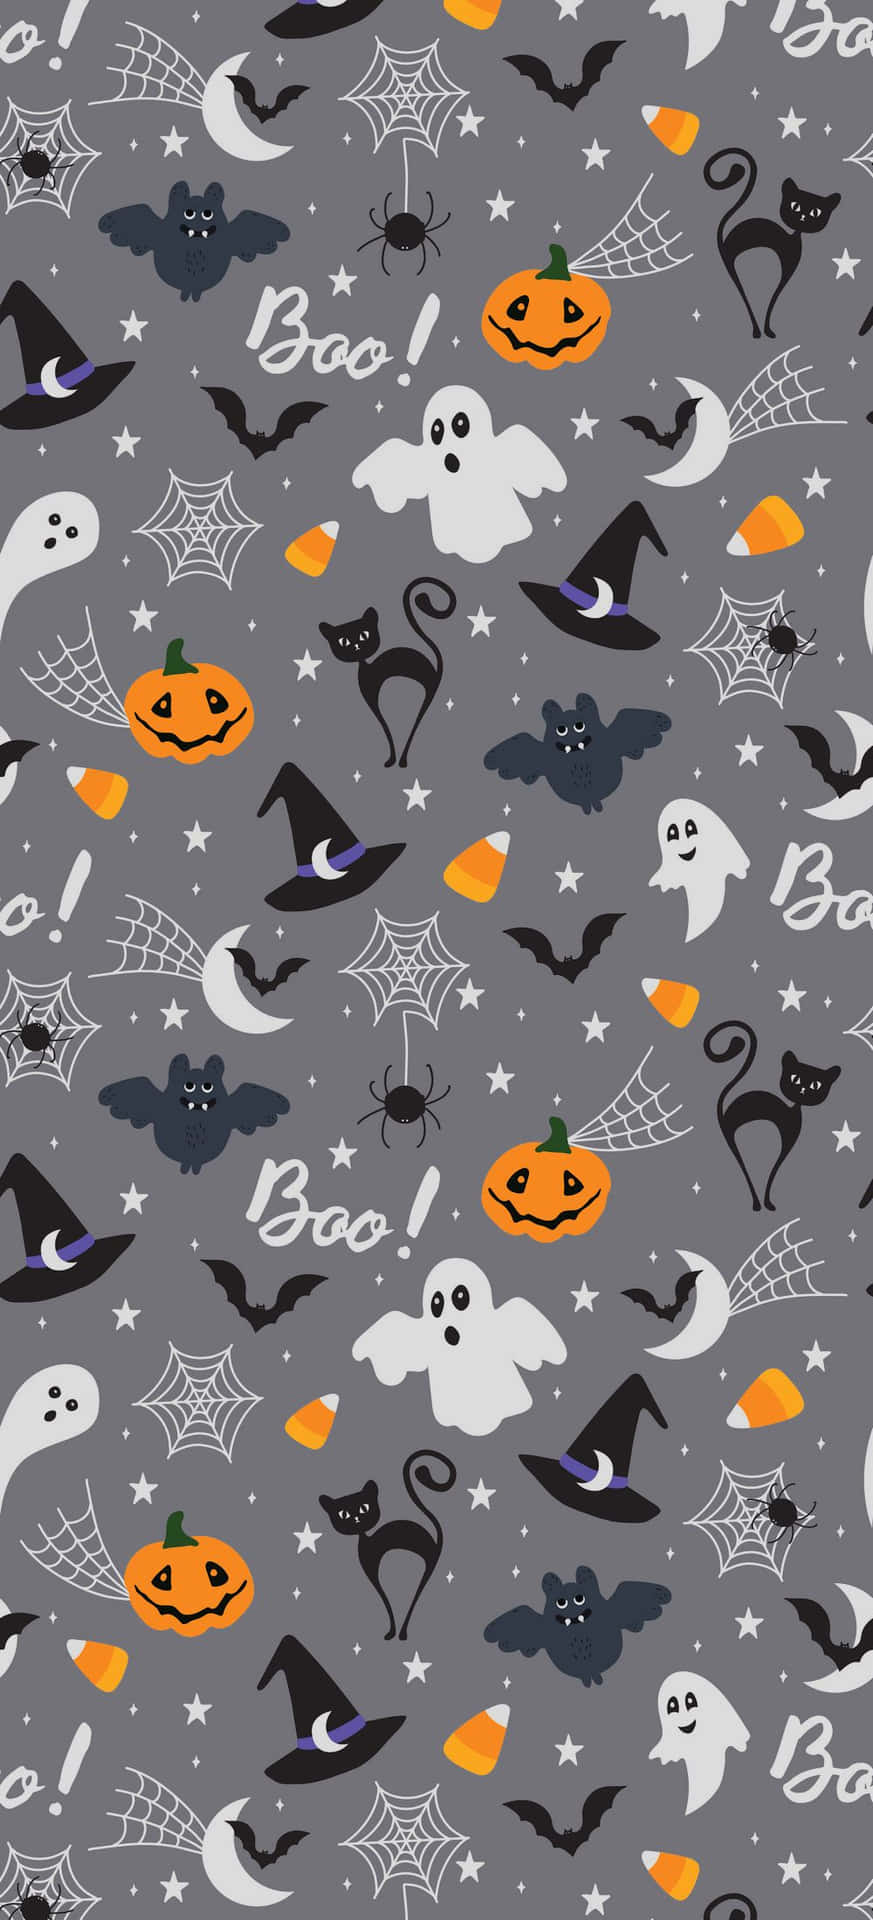 Get into the Halloween spirit with a spooky phone background